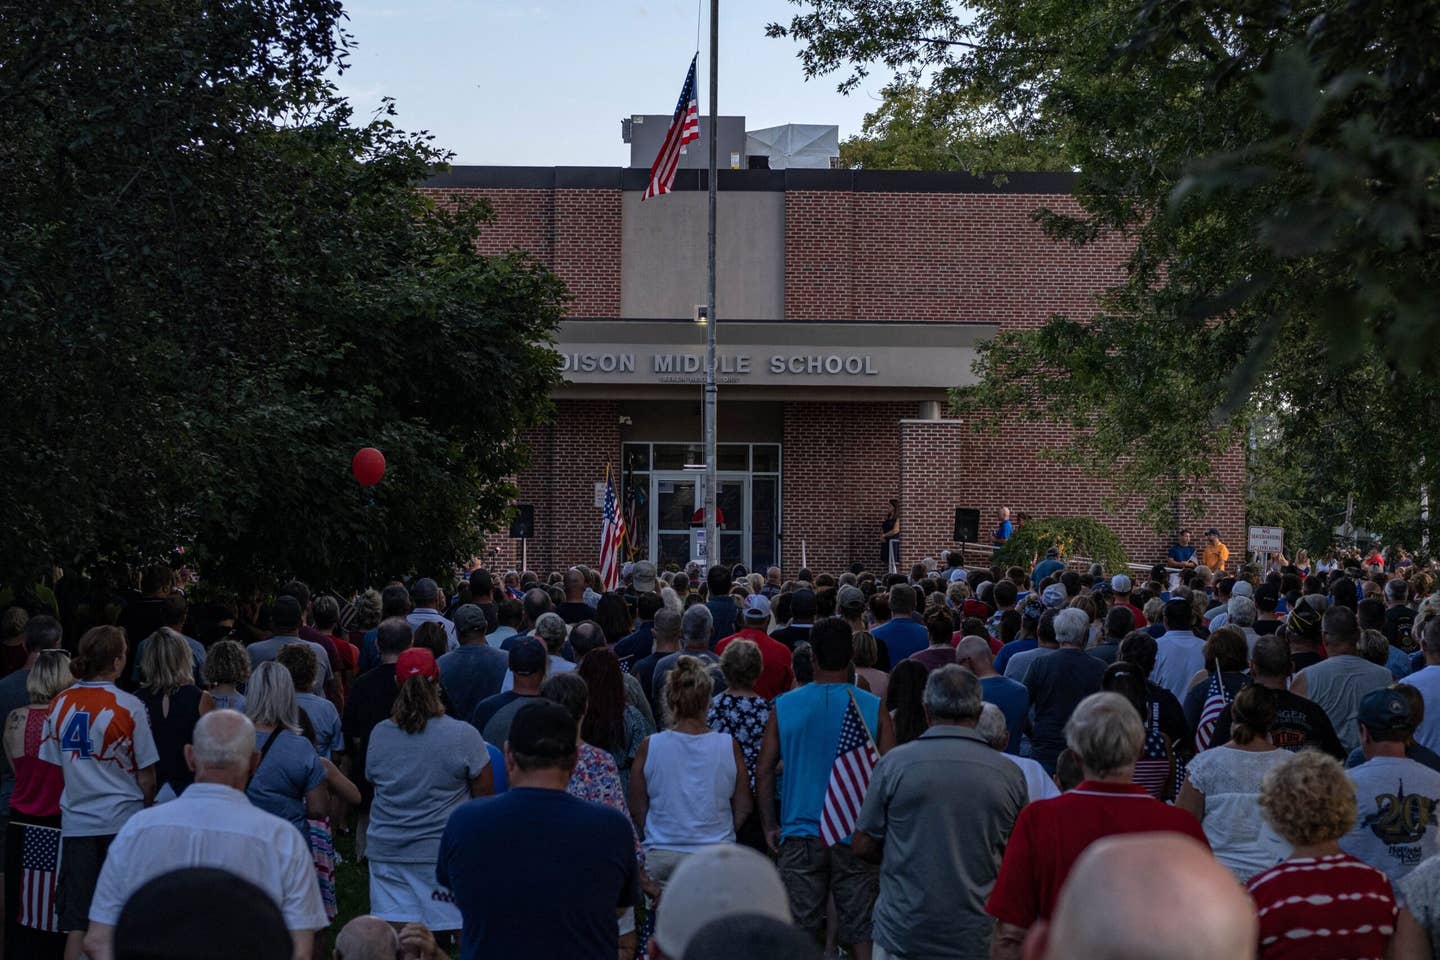 People attend a vigil for Navy Corpsman Maxton "Max" W. Soviak at Edison Middle School in Berlin Heights, Ohio on Aug. 29, 2021. Soviak was killed during the Aug. 26 terror attack outside of Kabul Airport in Afghanistan along with 12 other American service members and more than 100 Afghans. (Photo by SETH HERALD/AFP via Getty Images)